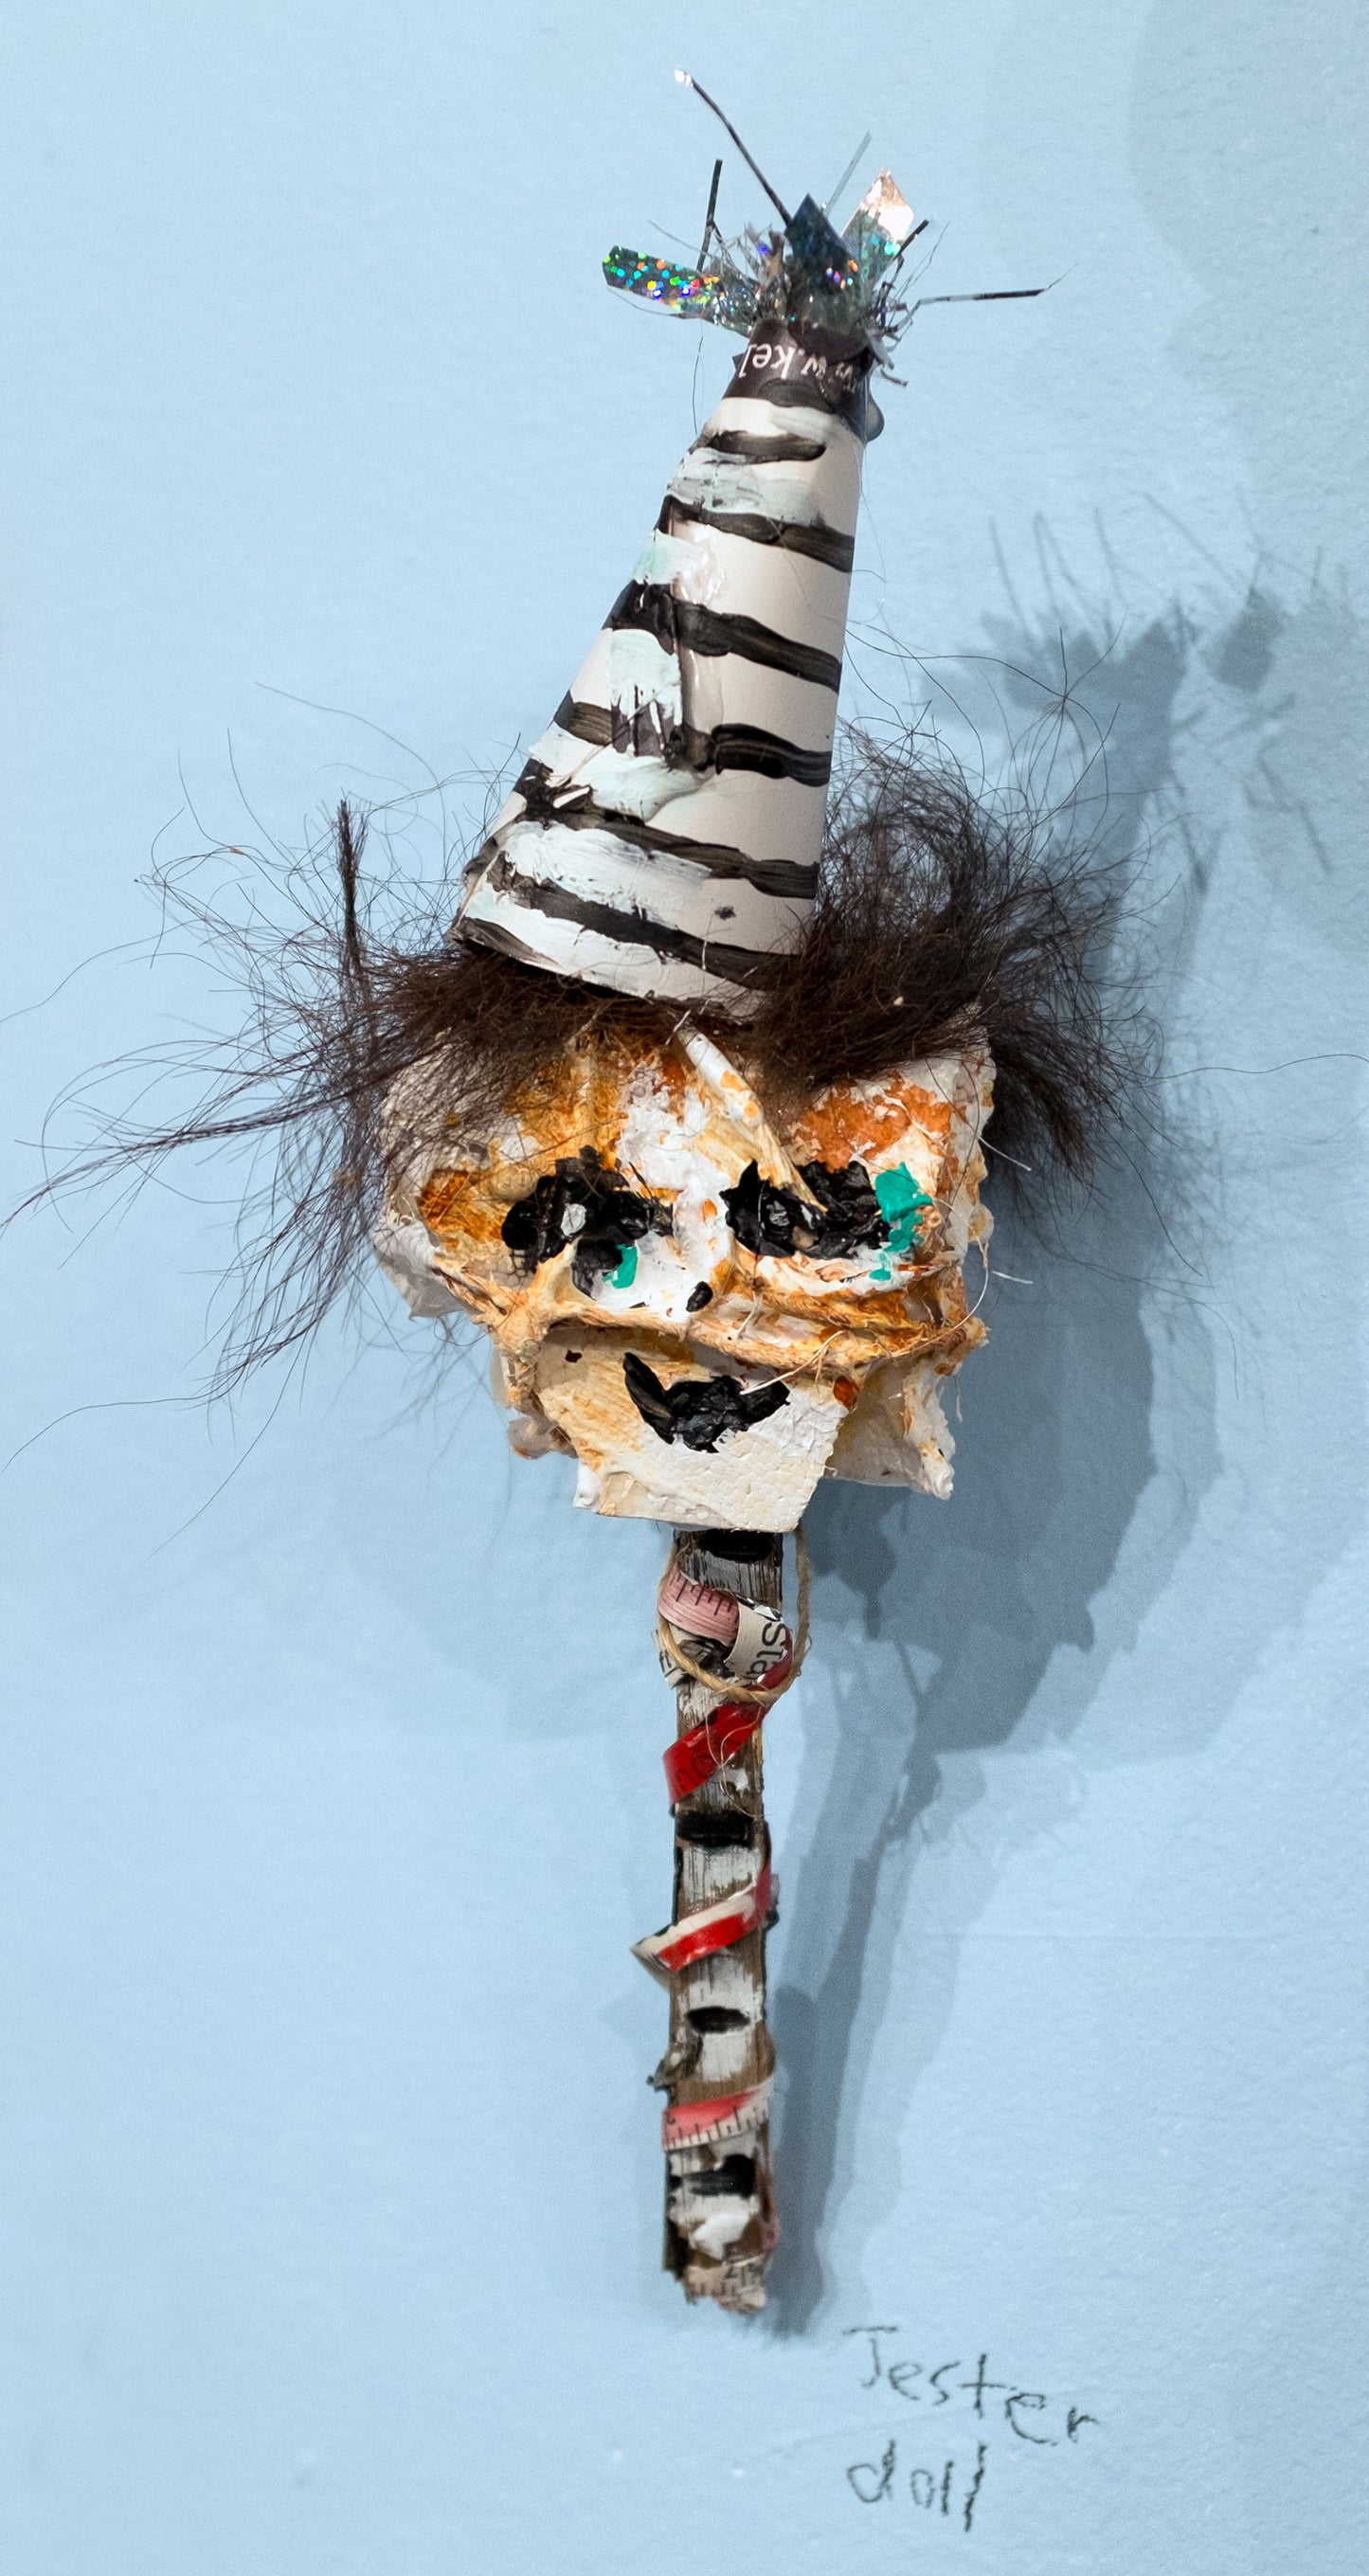 Jester Doll by Kelly Moore